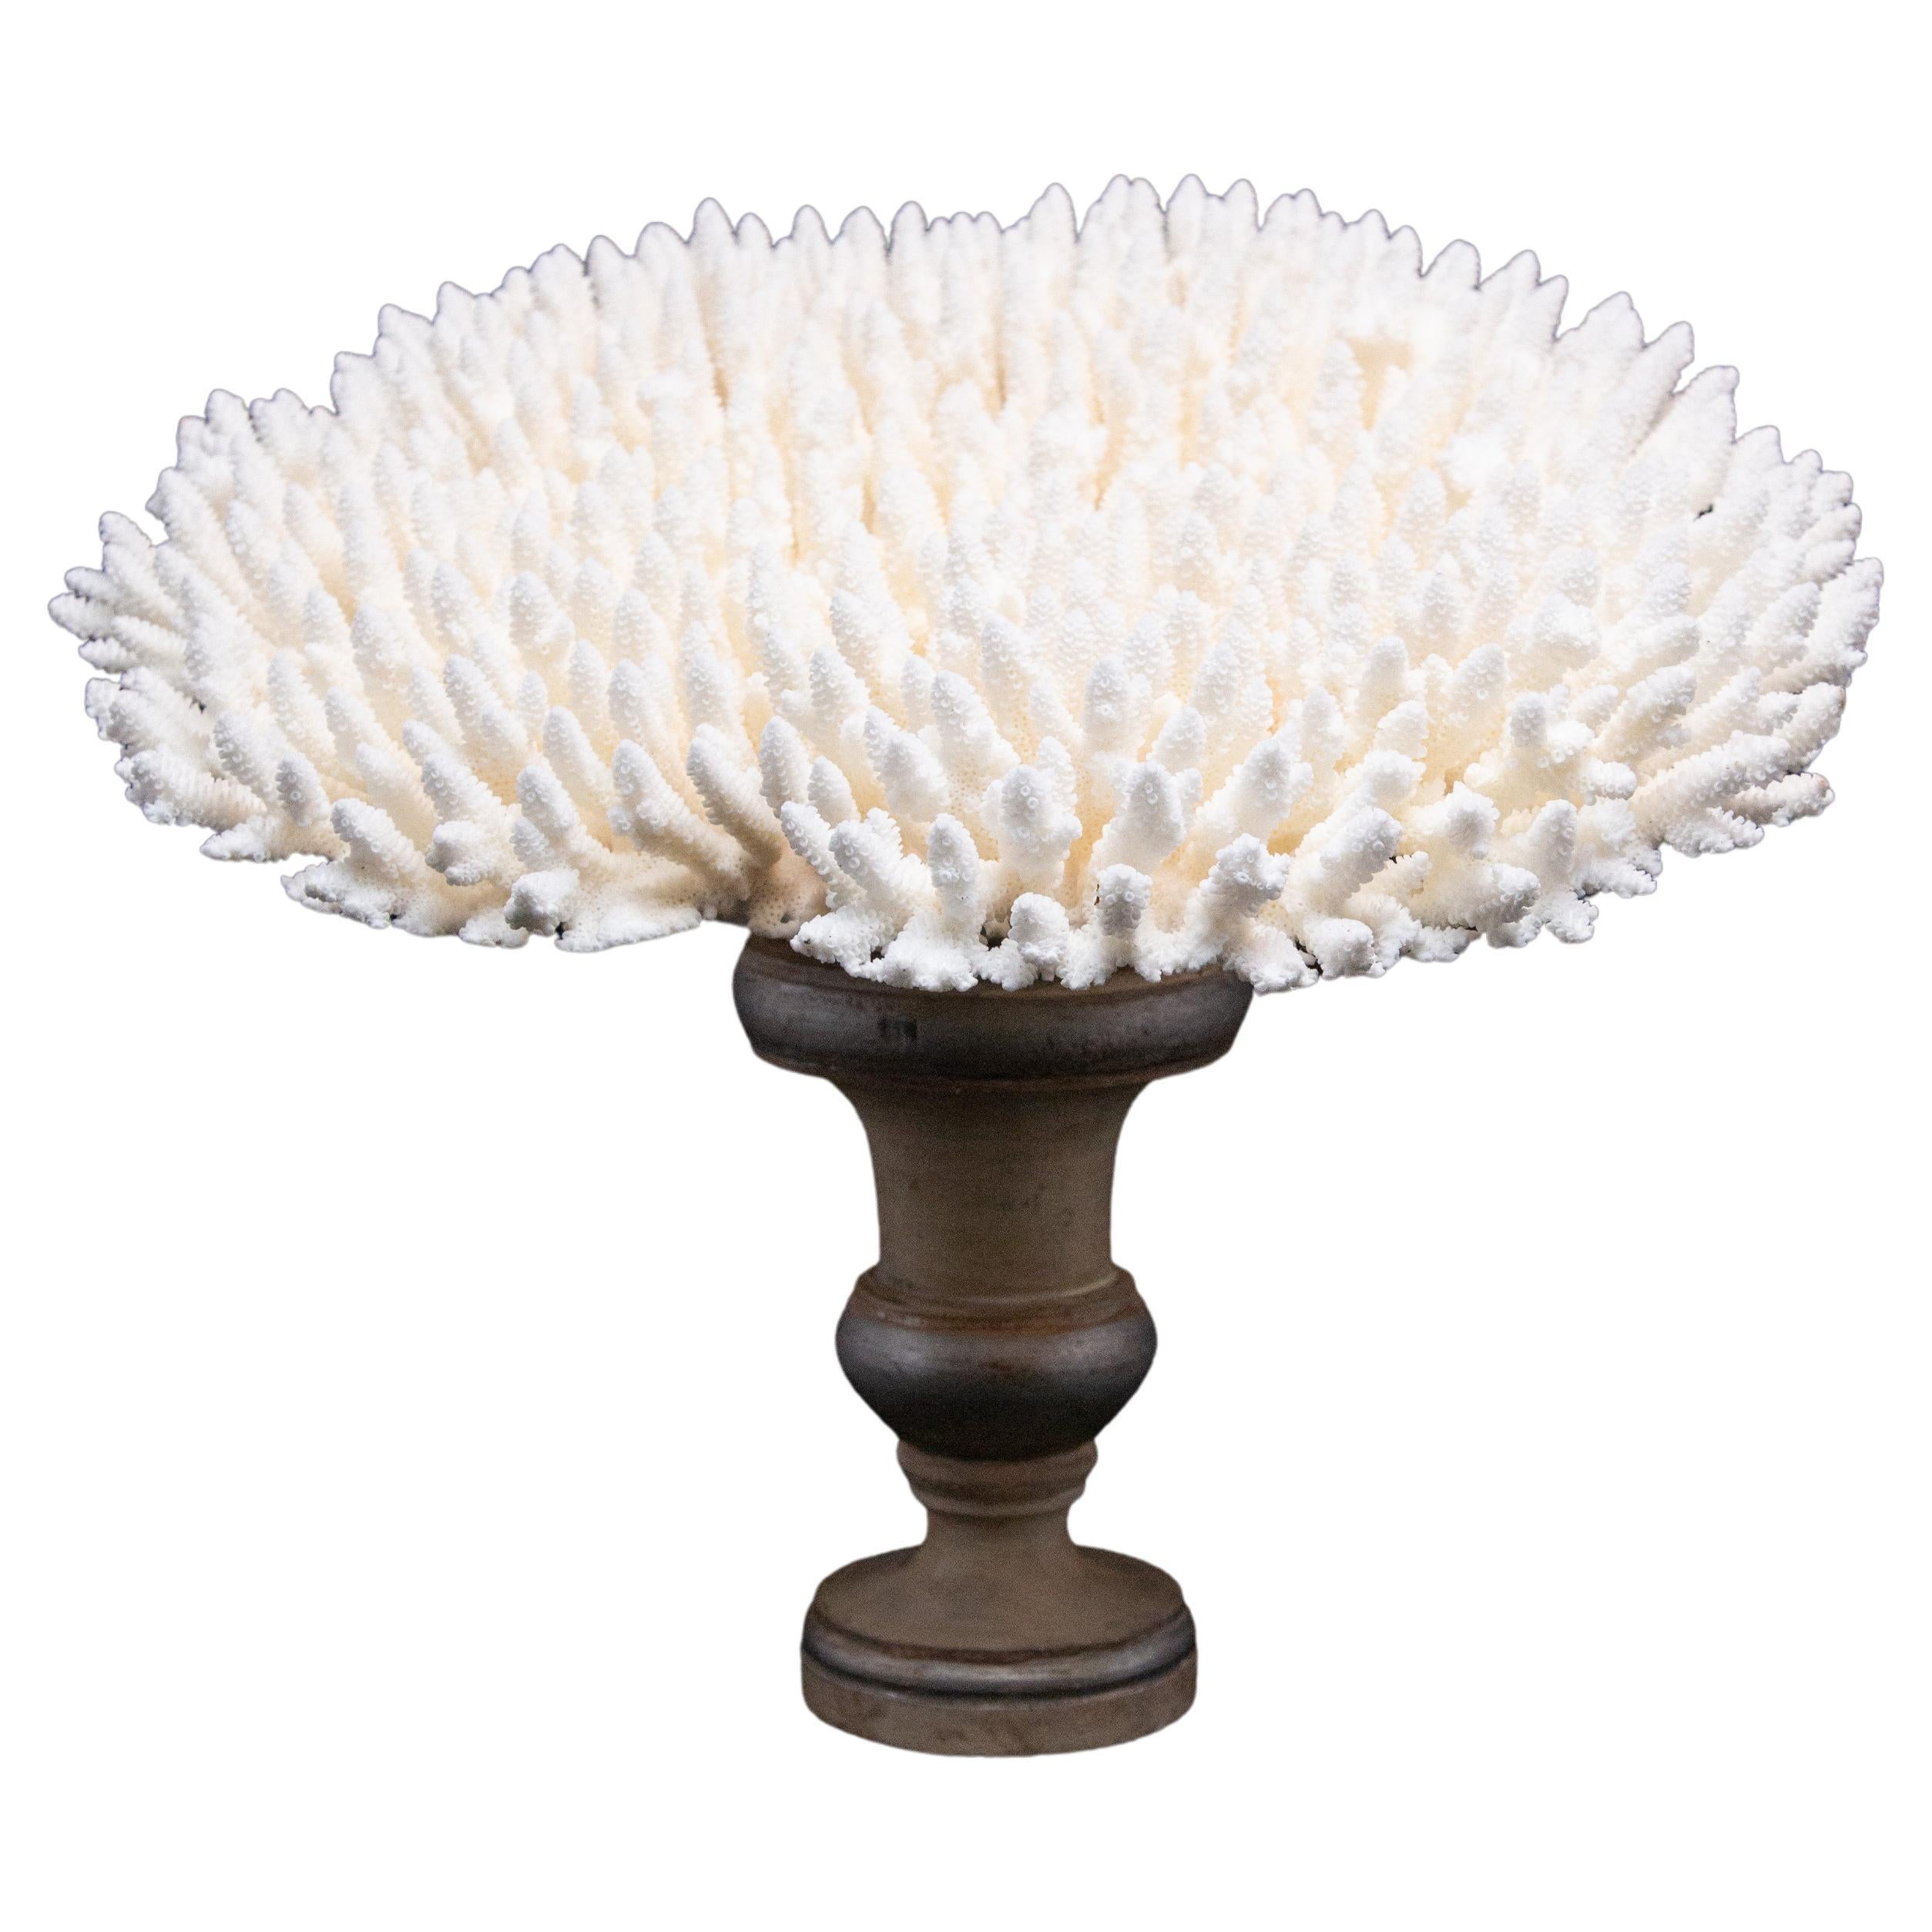 Table Coral Mounted On Medici Style Base:

Measures: 15